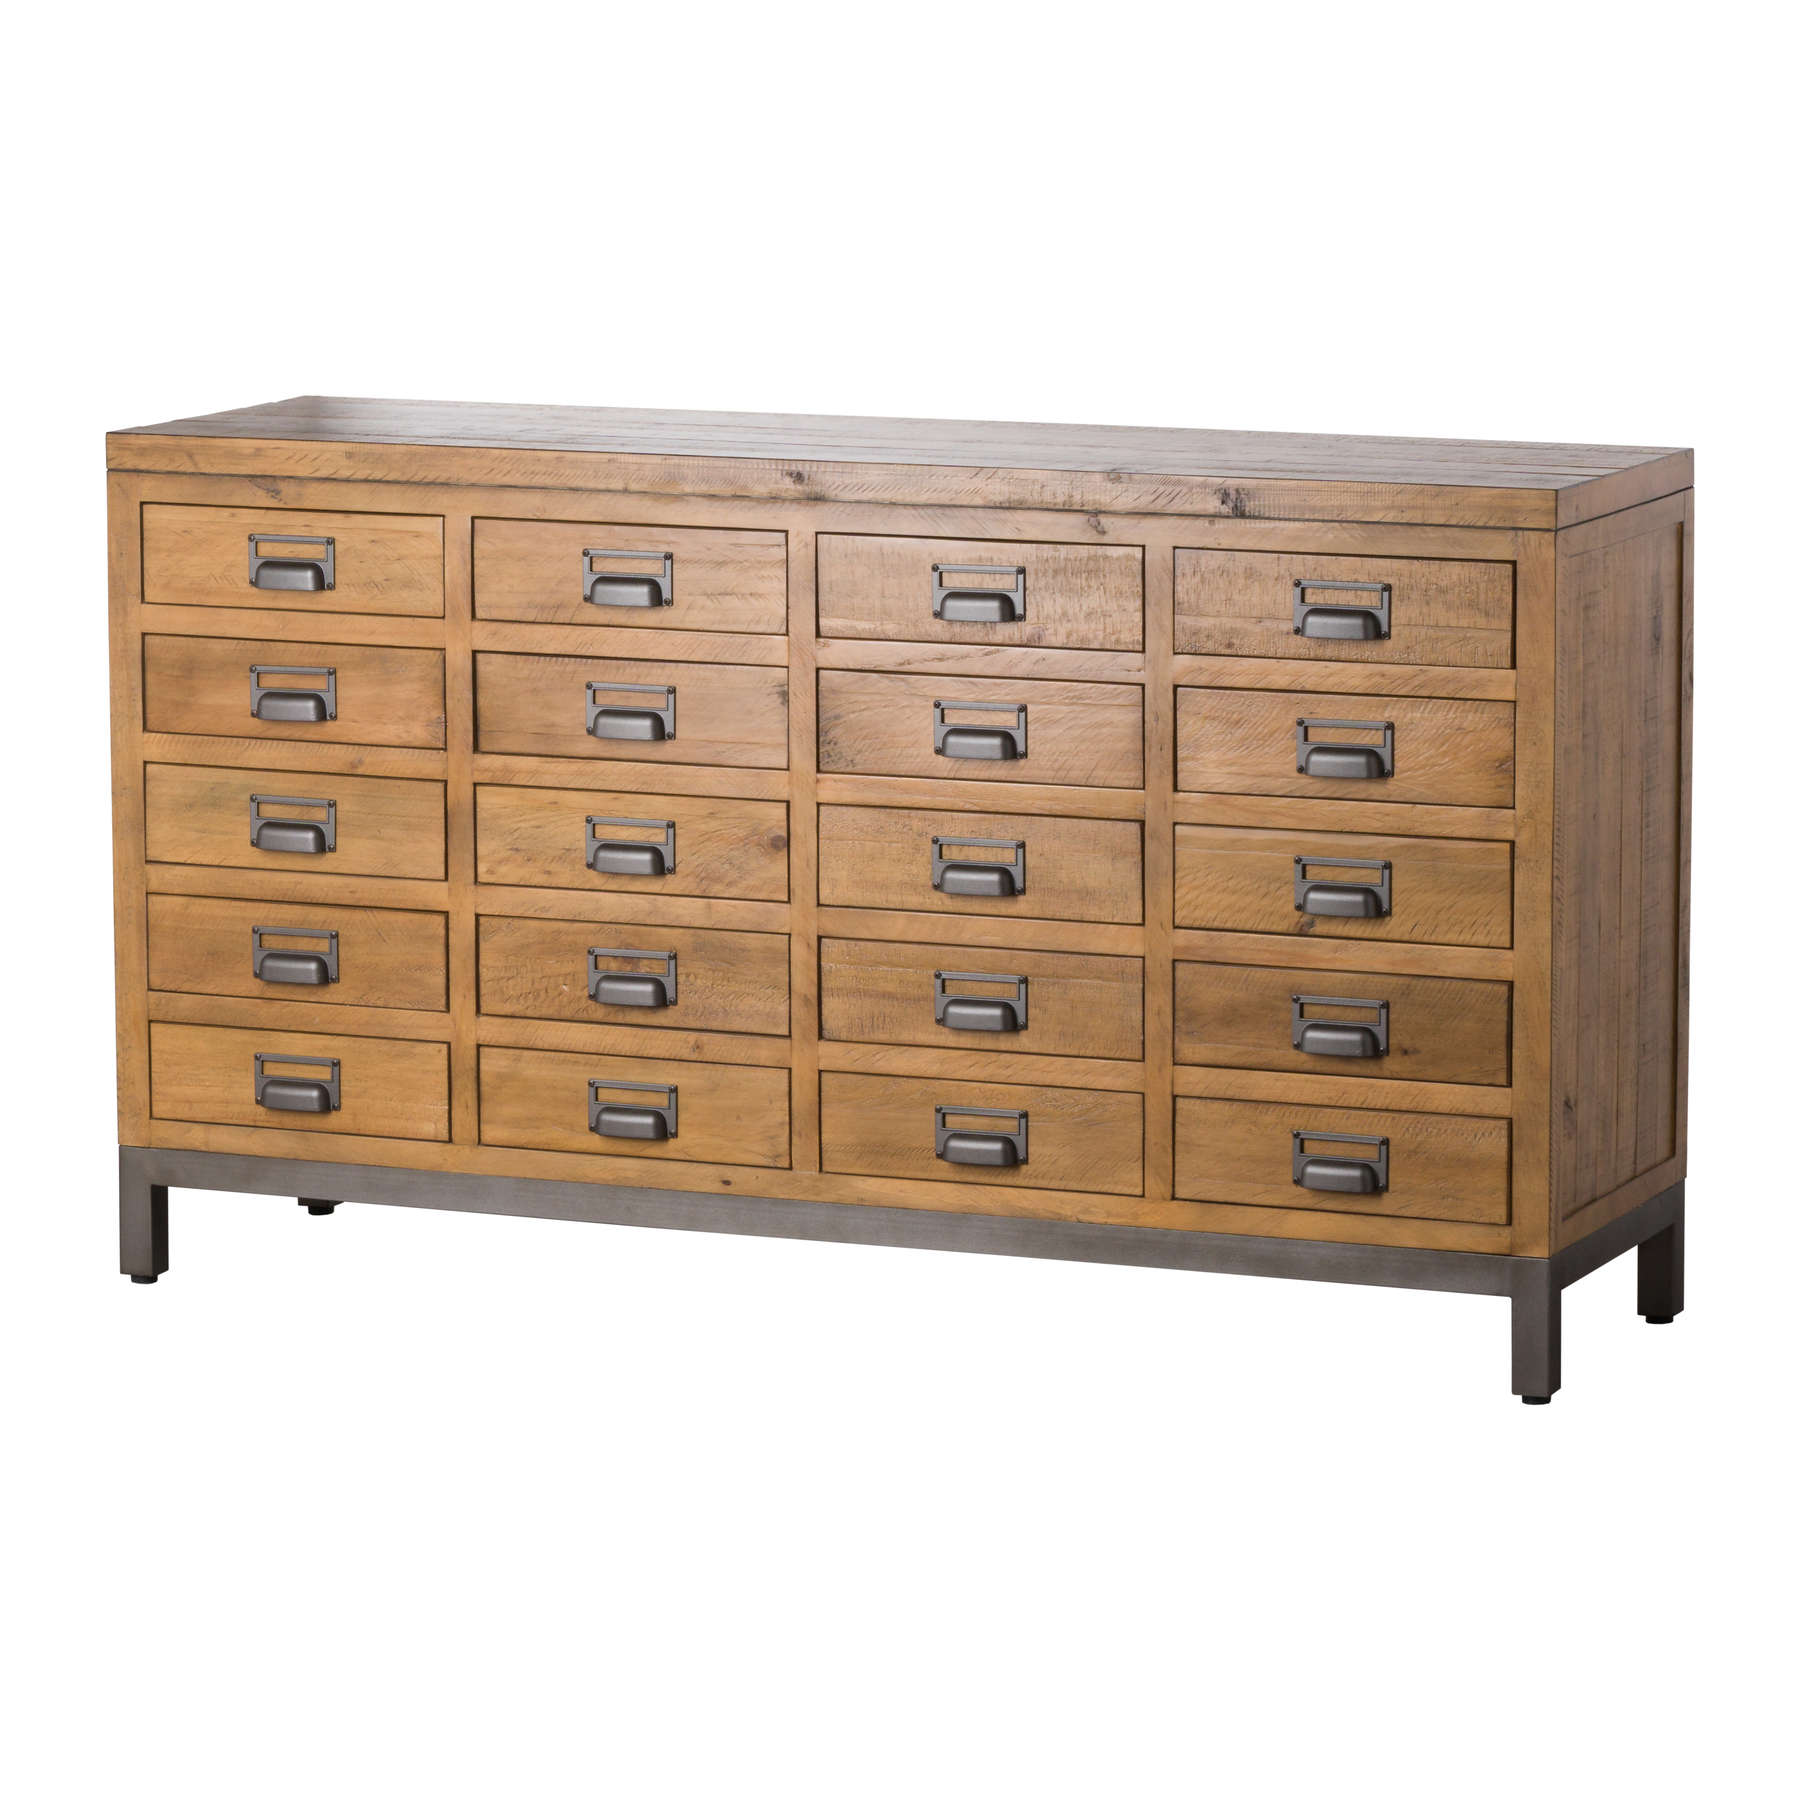 The Draftsman Collection 20 Drawer Merchant Chest - Image 1